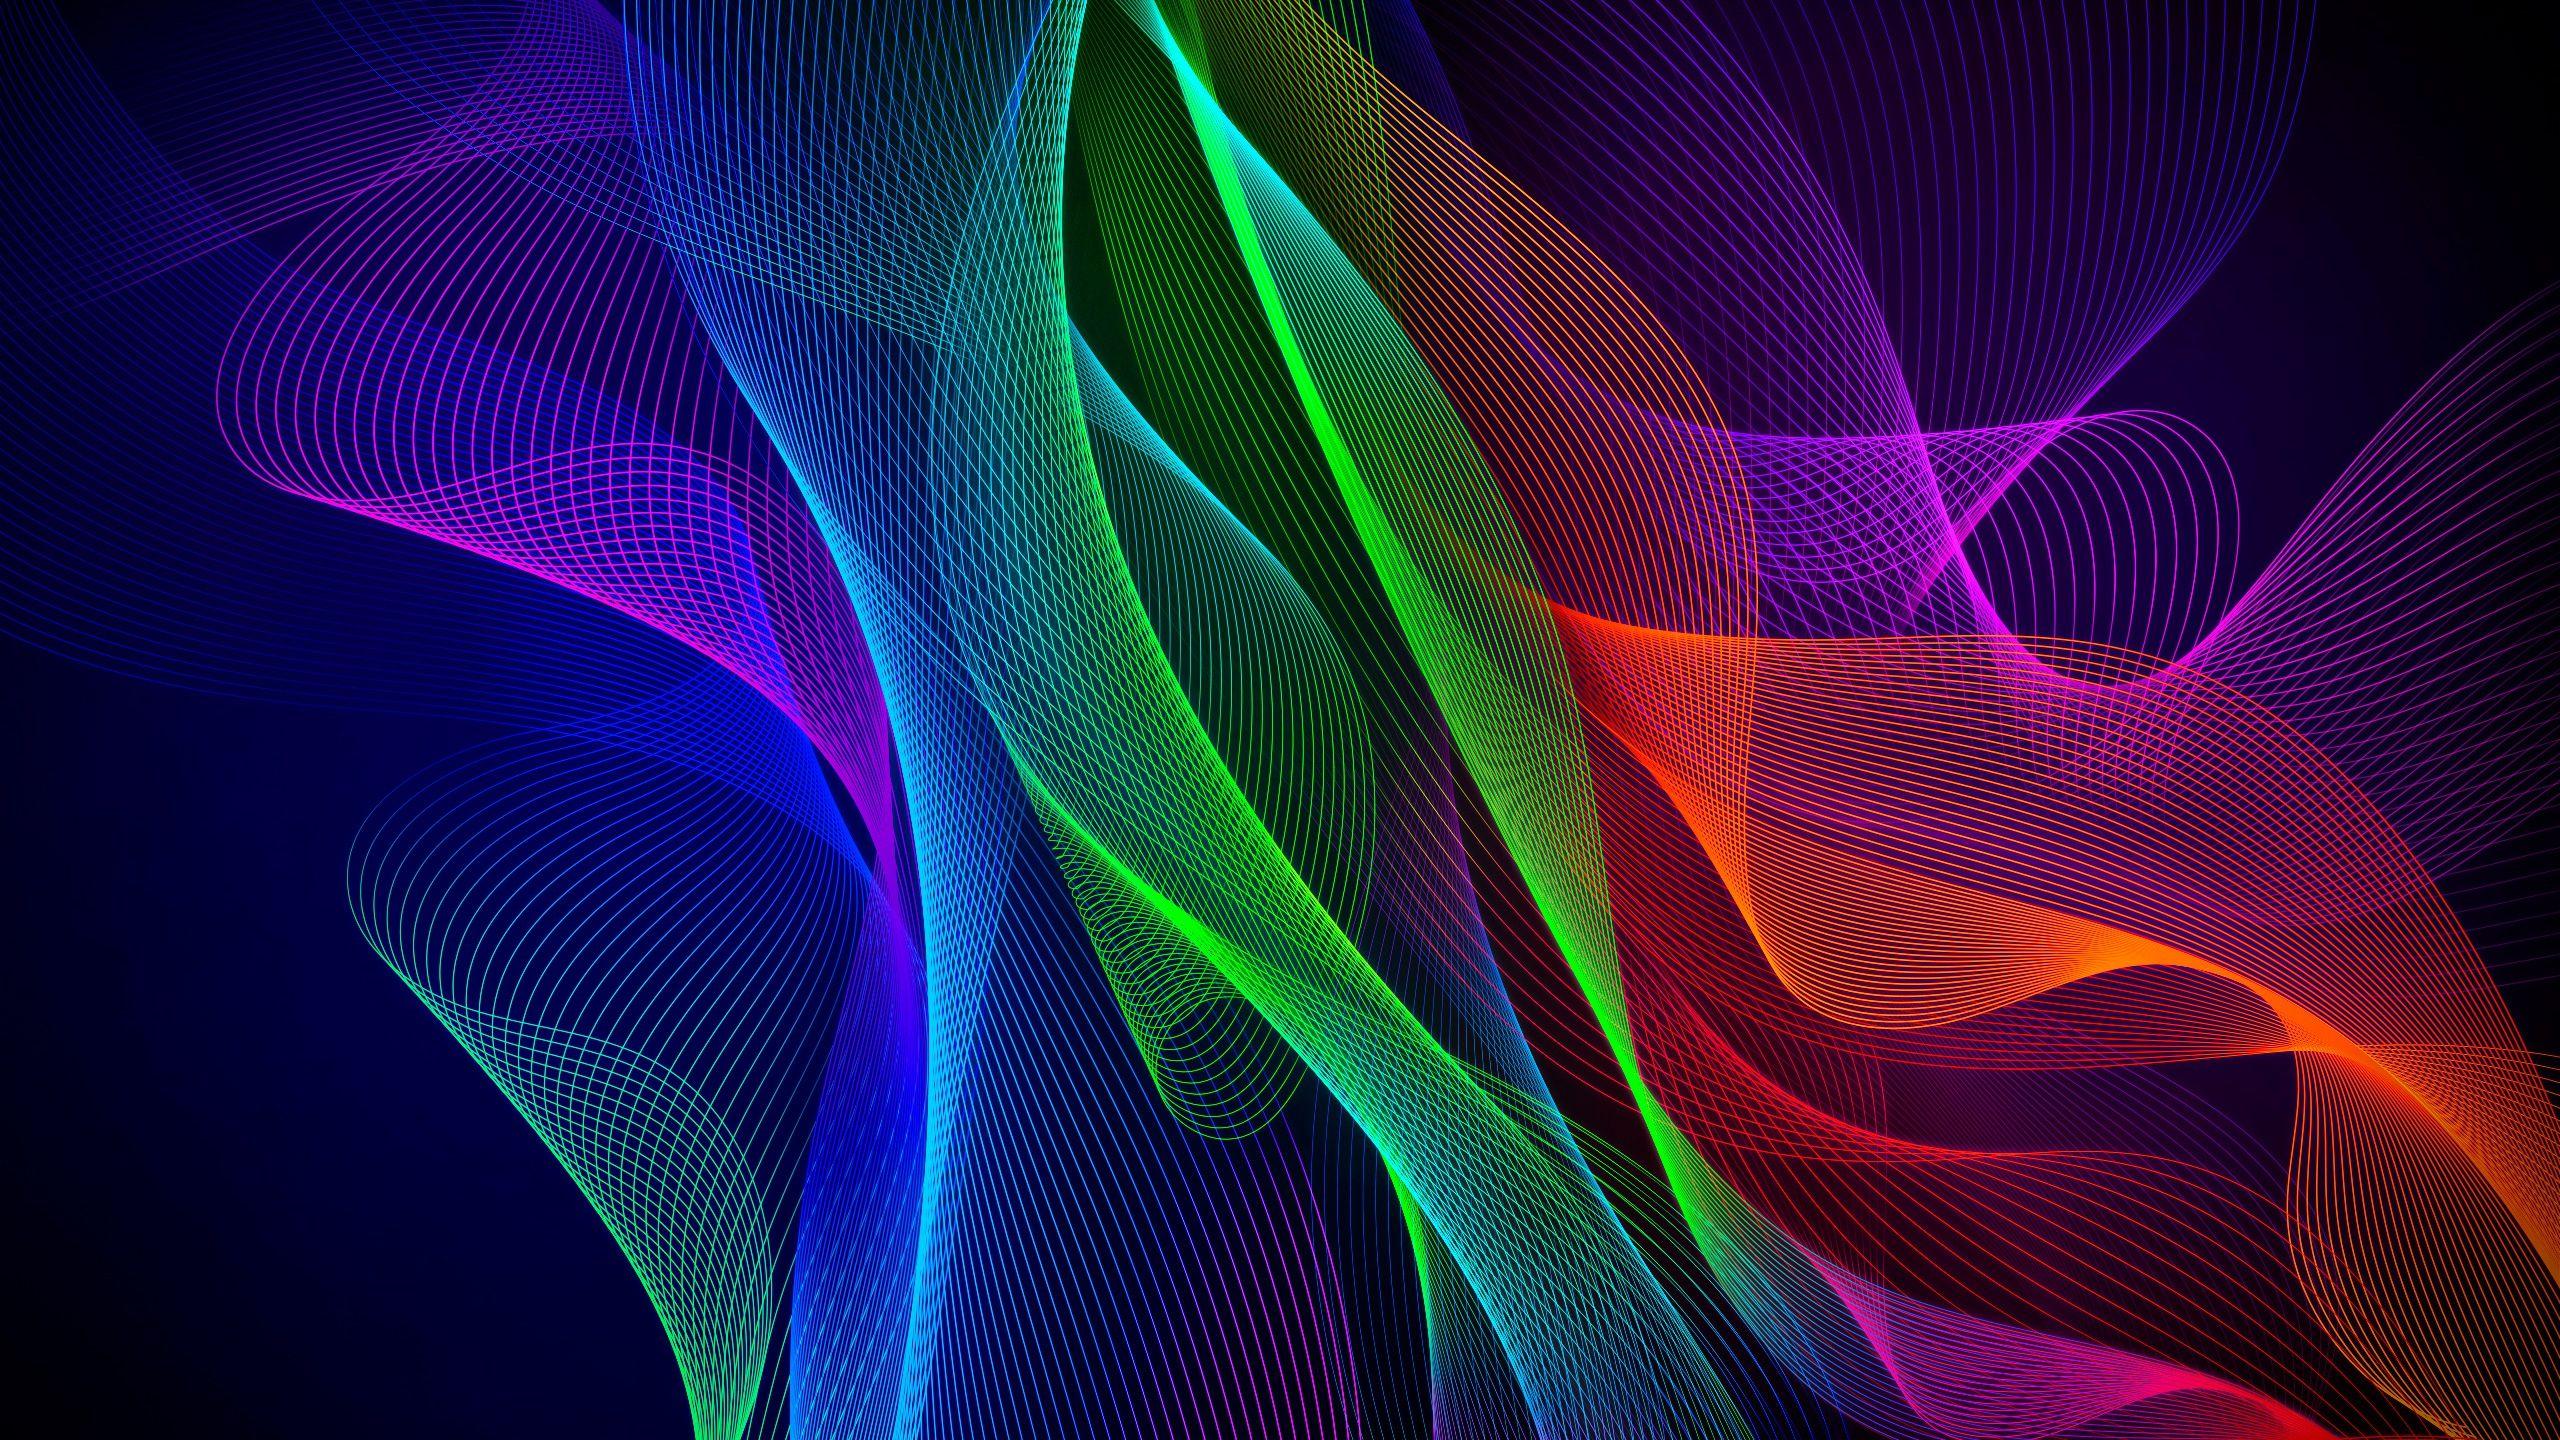 Colorful Dual Monitor Wallpapers - Top Free Colorful Dual Monitor